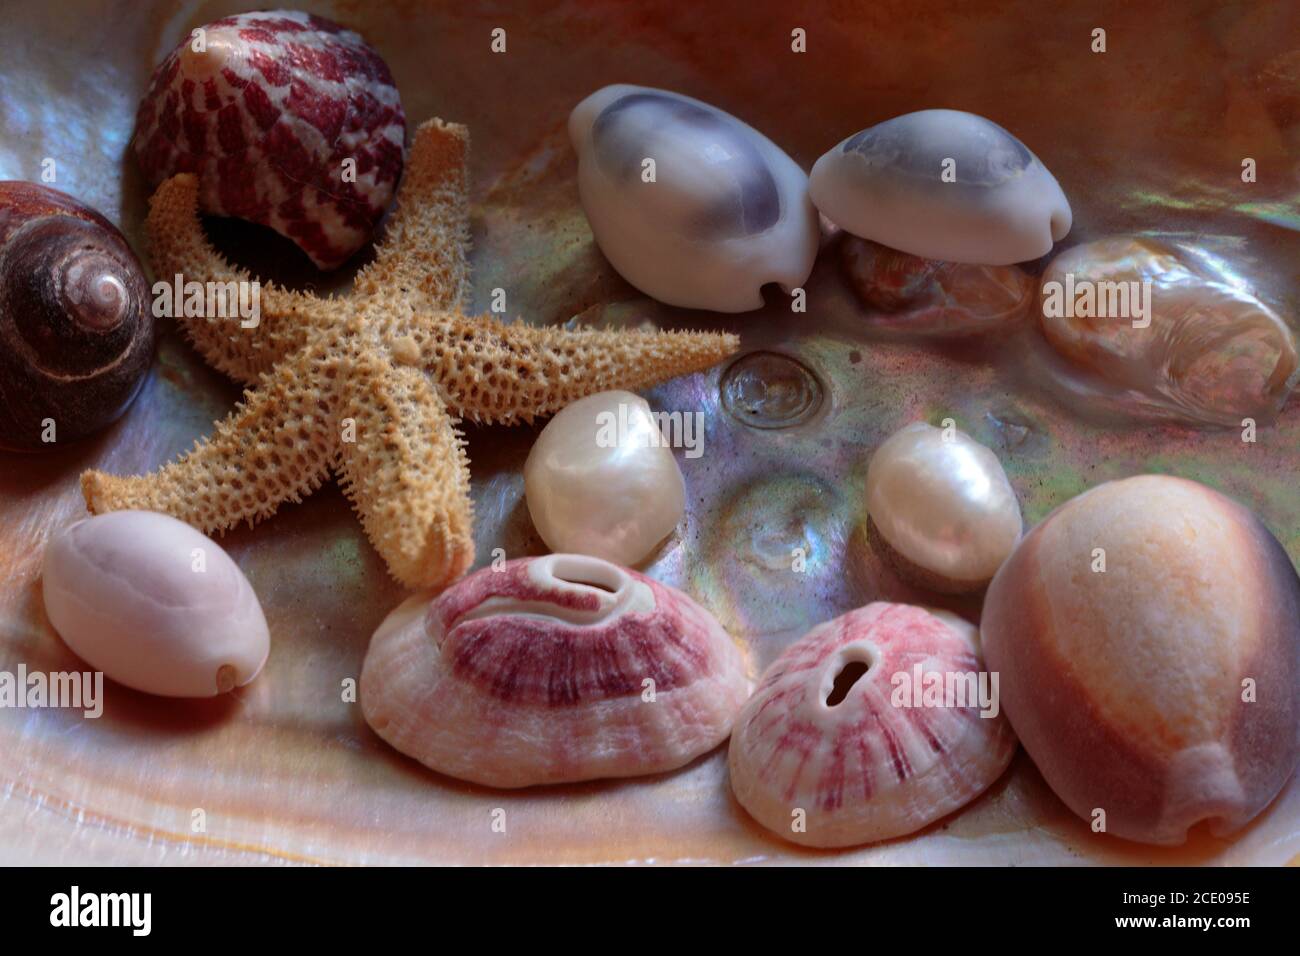 arrangement of seashells and a dried starfish set inside a large mother of pearl mollusk shell in warm red orange and yellow tones Stock Photo